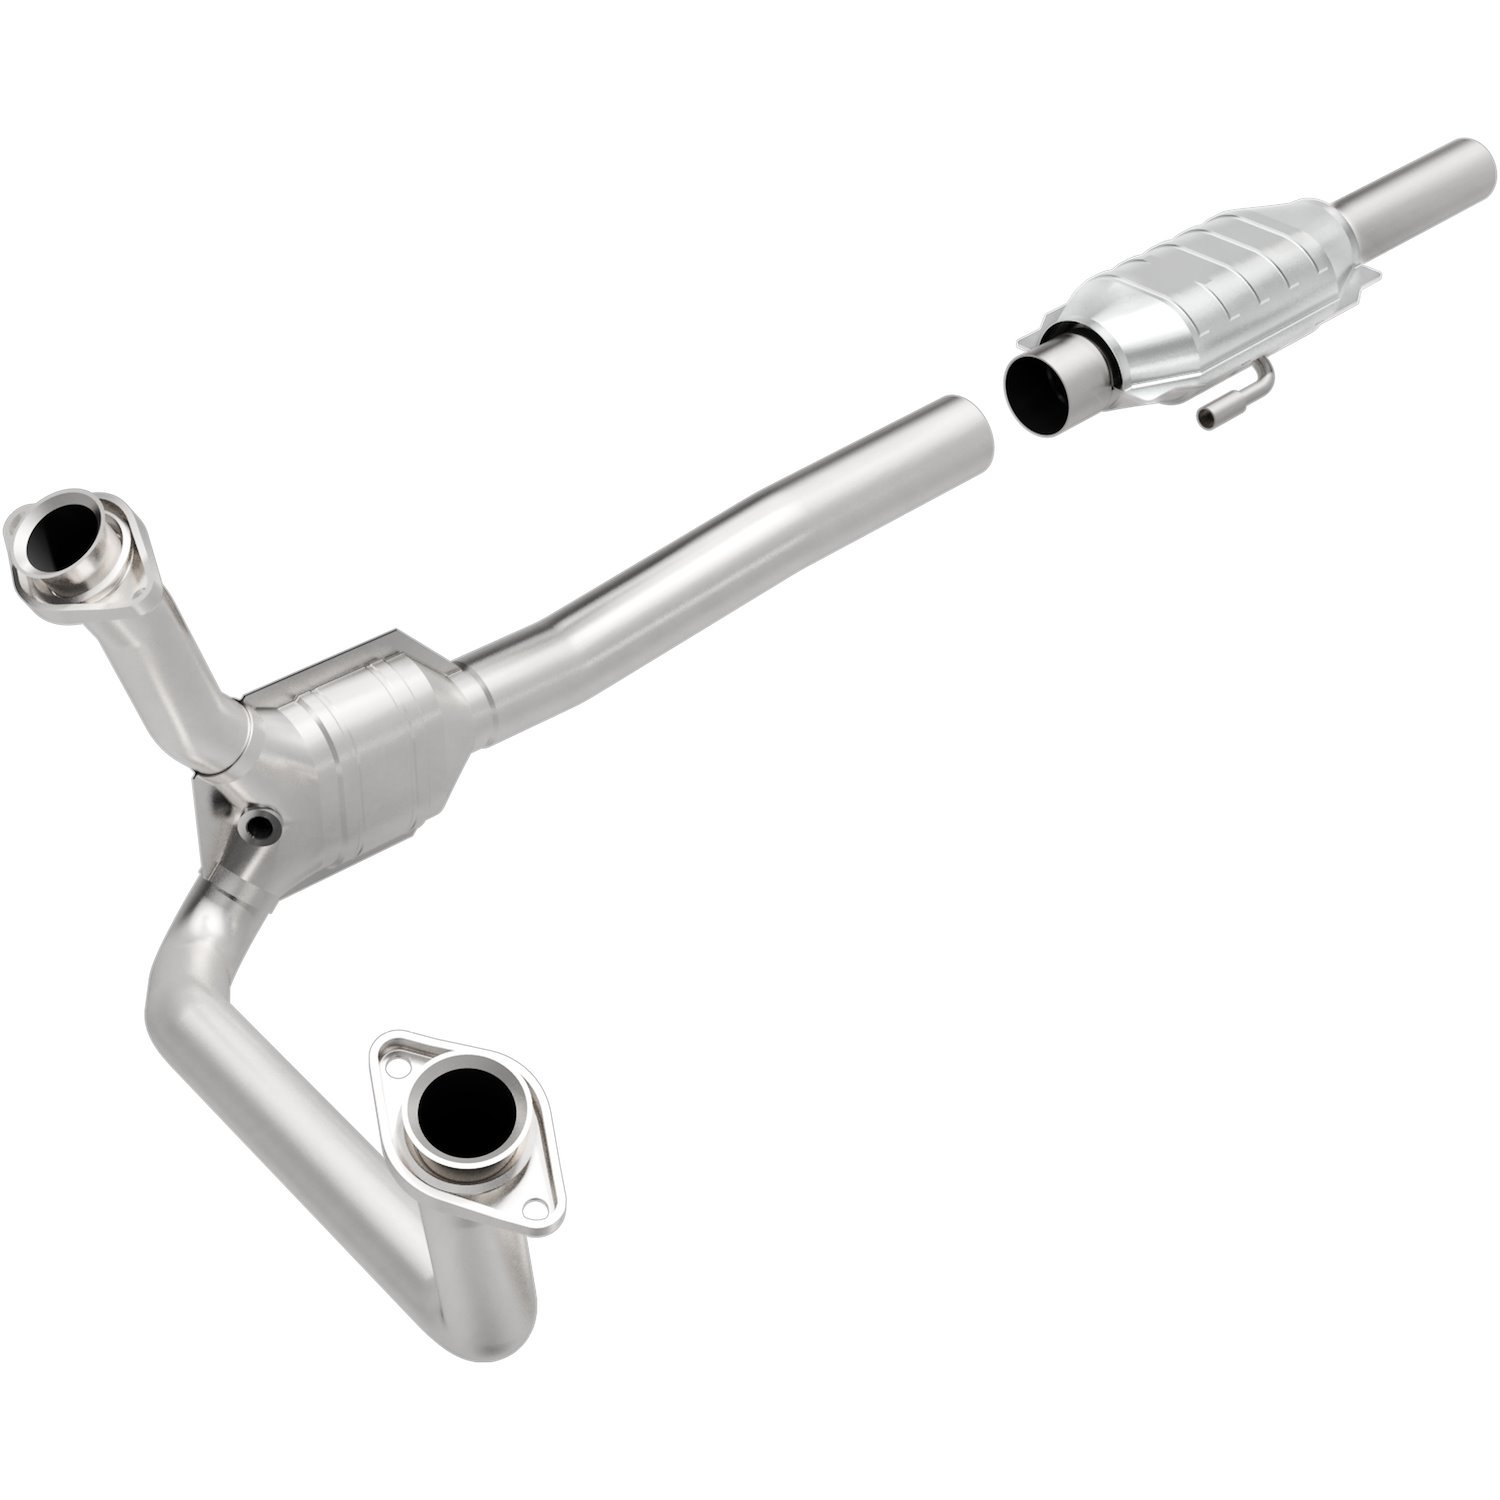 California Grade CARB Compliant Direct-Fit Catalytic Converter 1985-1995 Ford F150 and Bronco